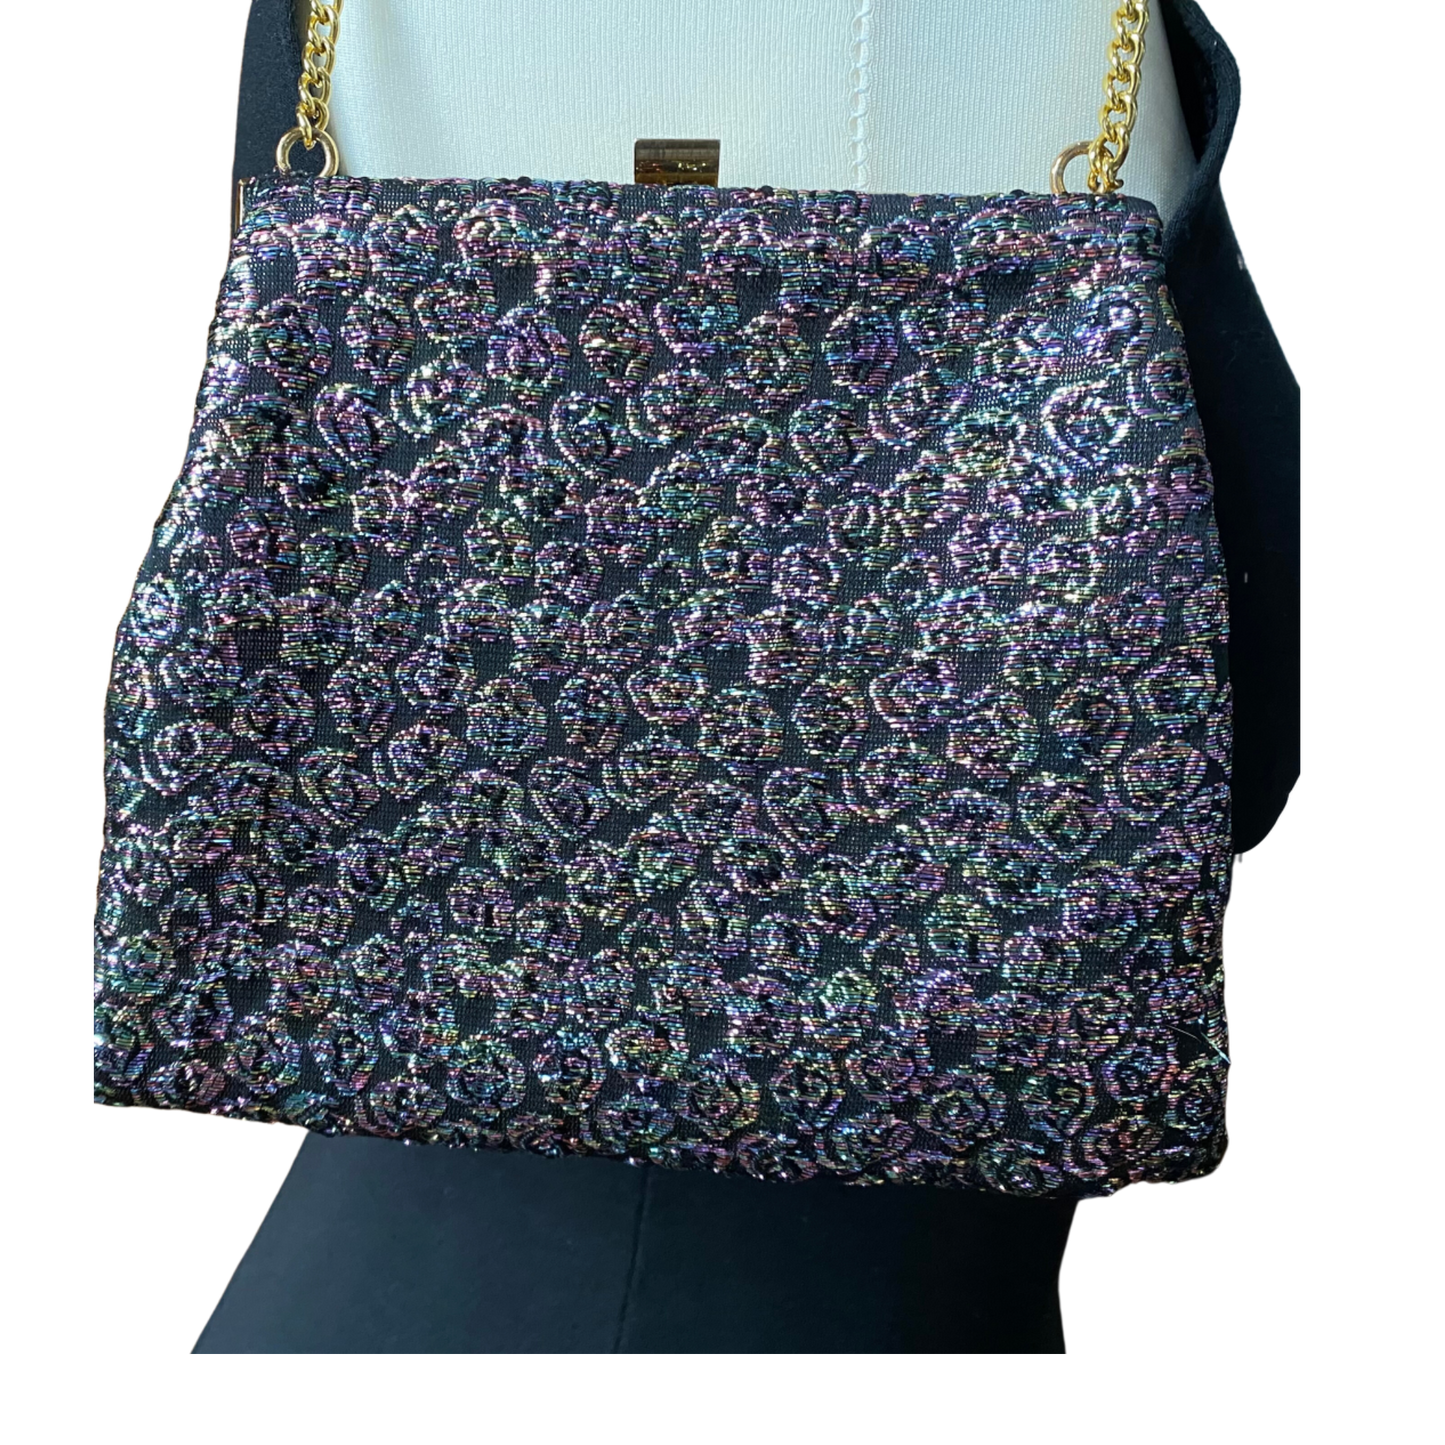 Vintage sparkly rainbow floral fabric evening bag with gold clip frame. Perfect Christmas accessory. Gift idea